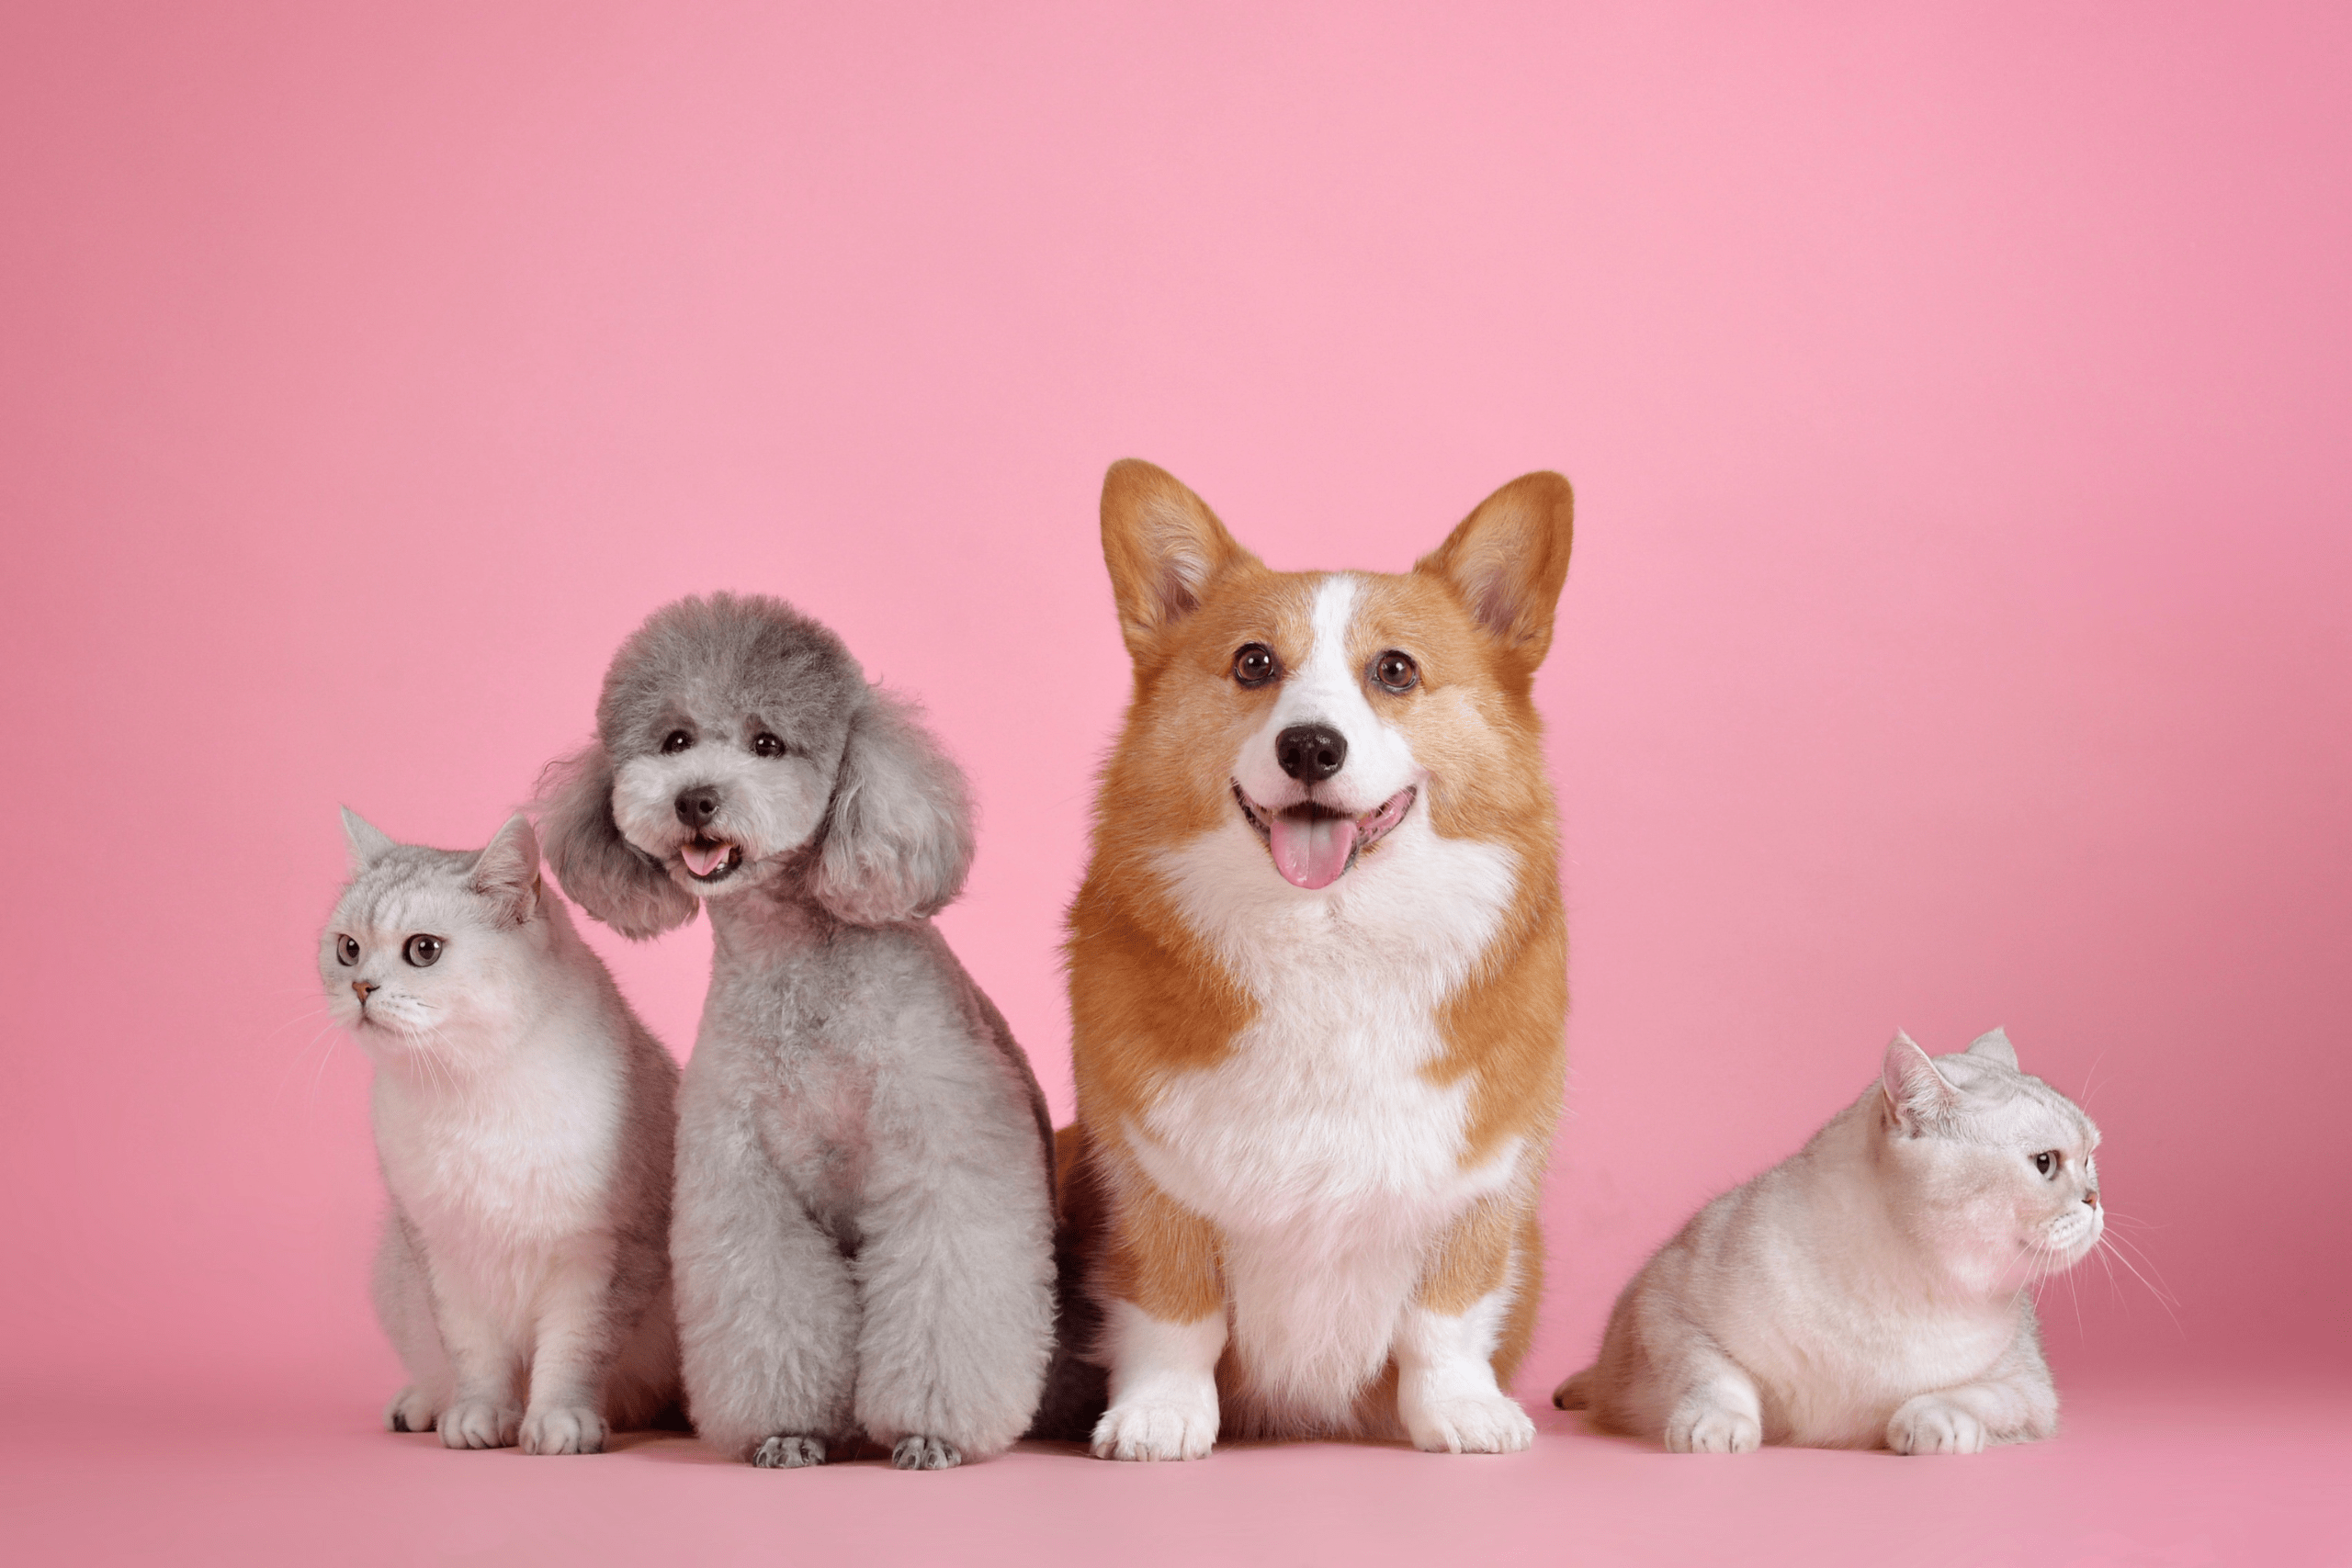 Image of dogs and cats to introduce our blog, 'Digital Marketing for Pet Businesses'.